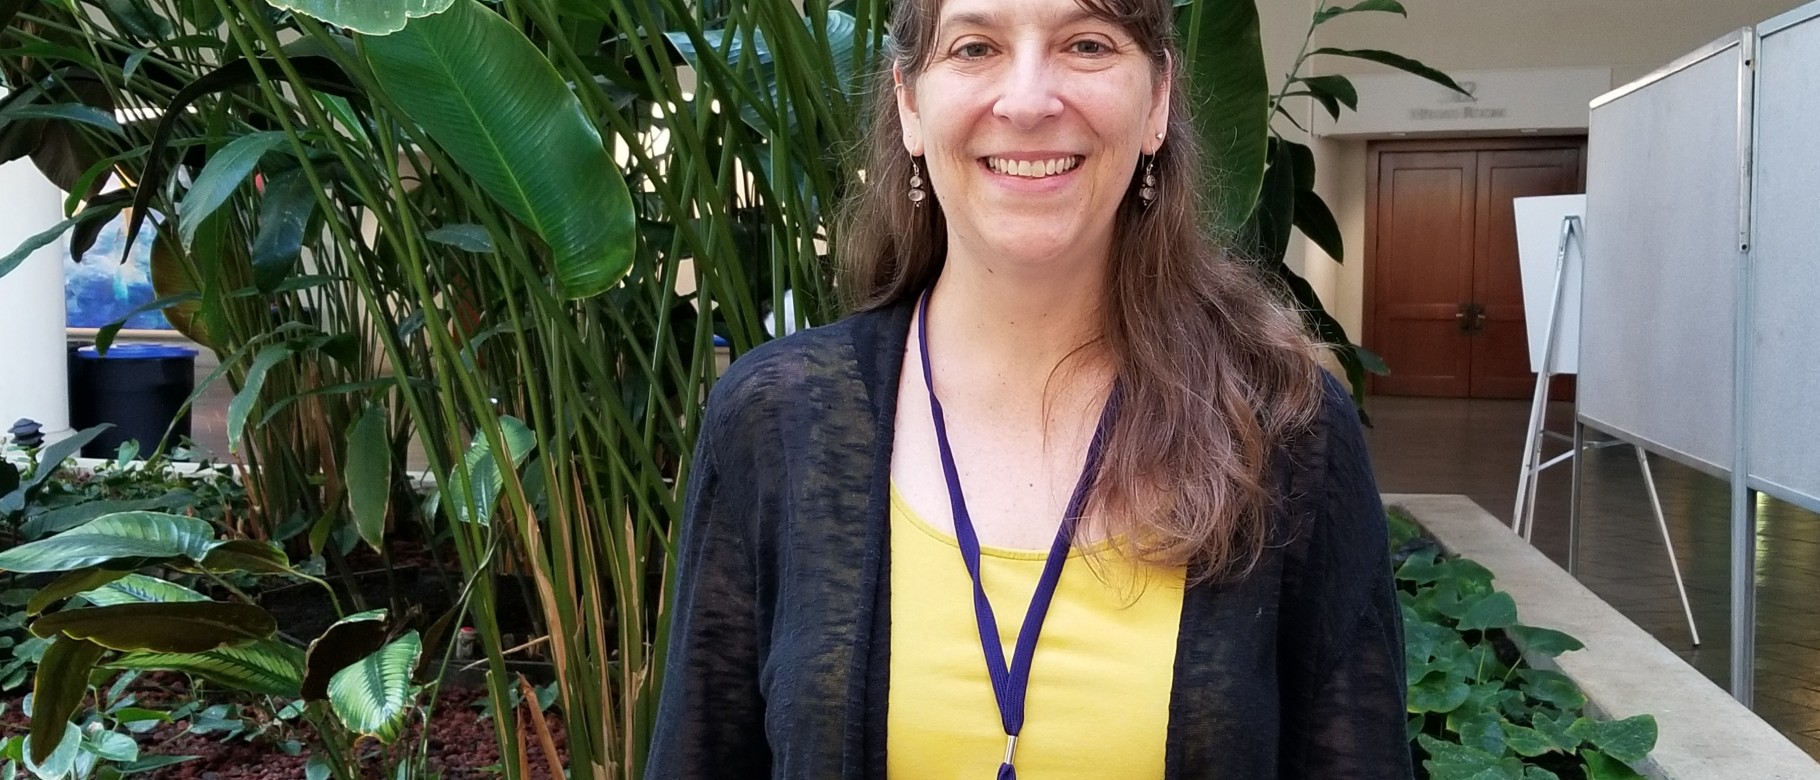 Jennifer Tuttle recently presented at the American Studies Association Conference in Honolulu, Hawaii